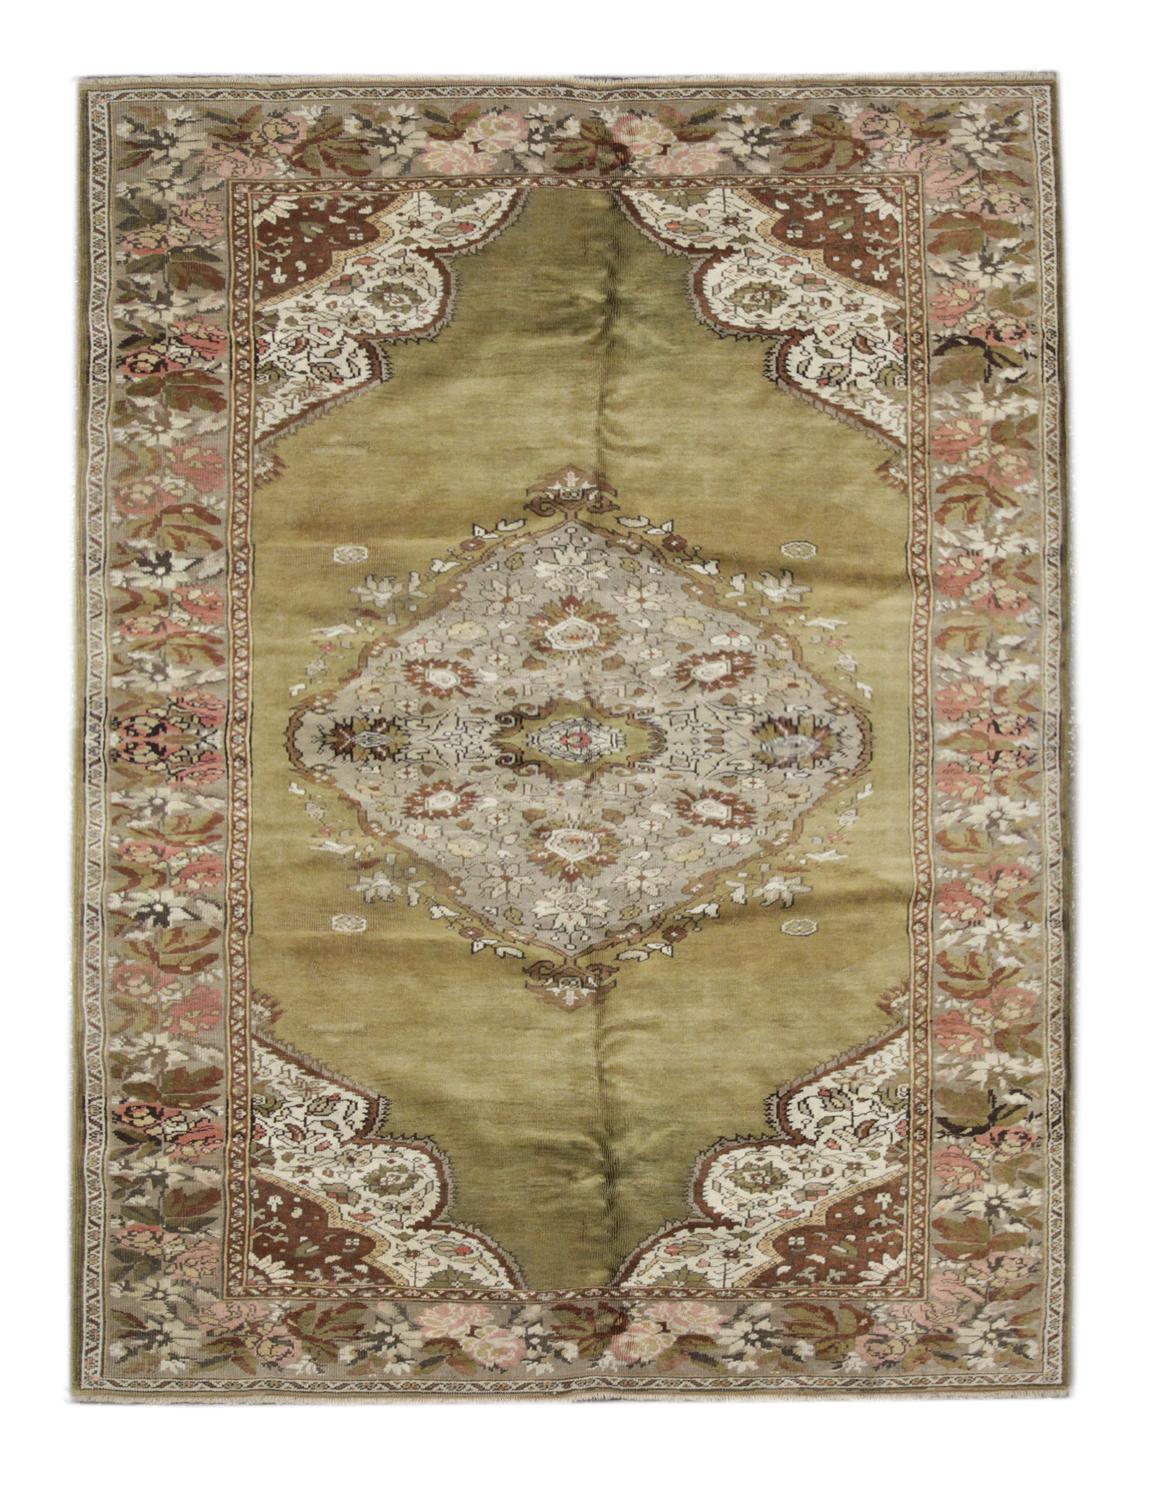 Handmade carpet muted olive green, pink and beige tones sit in harmony on this large area rug—Handwoven with the finest handspun cotton and wool dyed using organic vegetable dyes. A large central medallion makes this handmade rug stand out in any